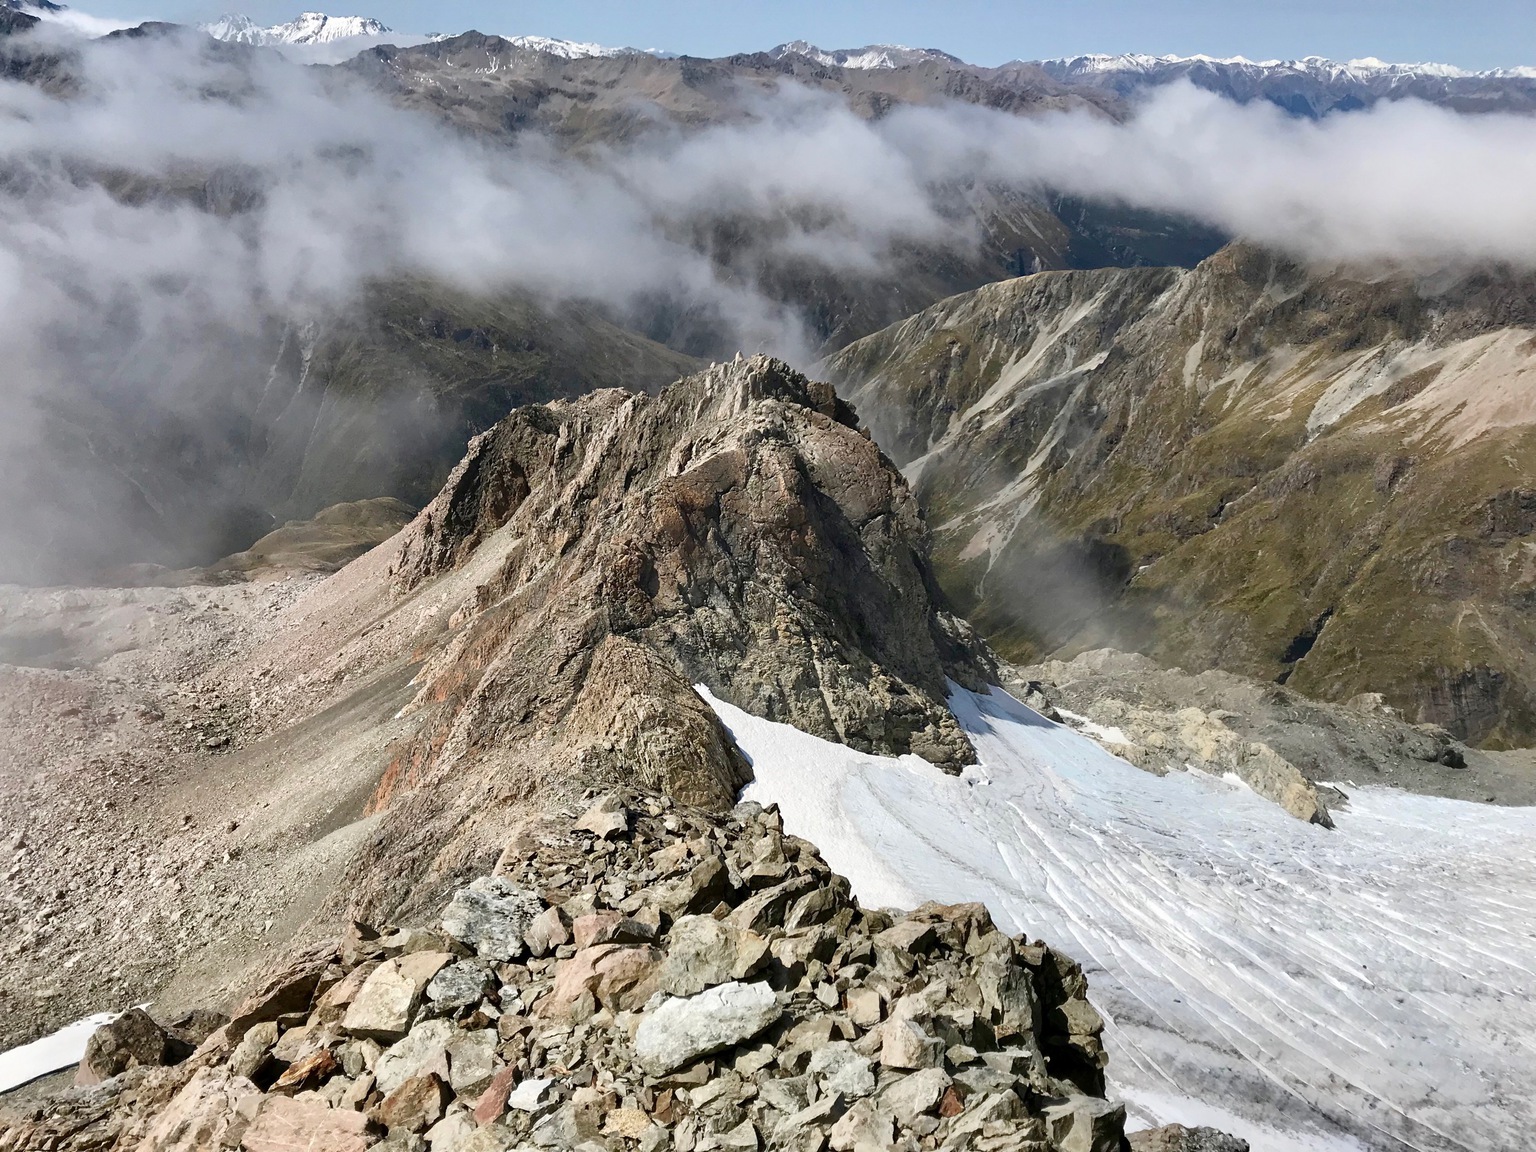 View down the east ridge towards Arthur's Pass, on commencing descent.